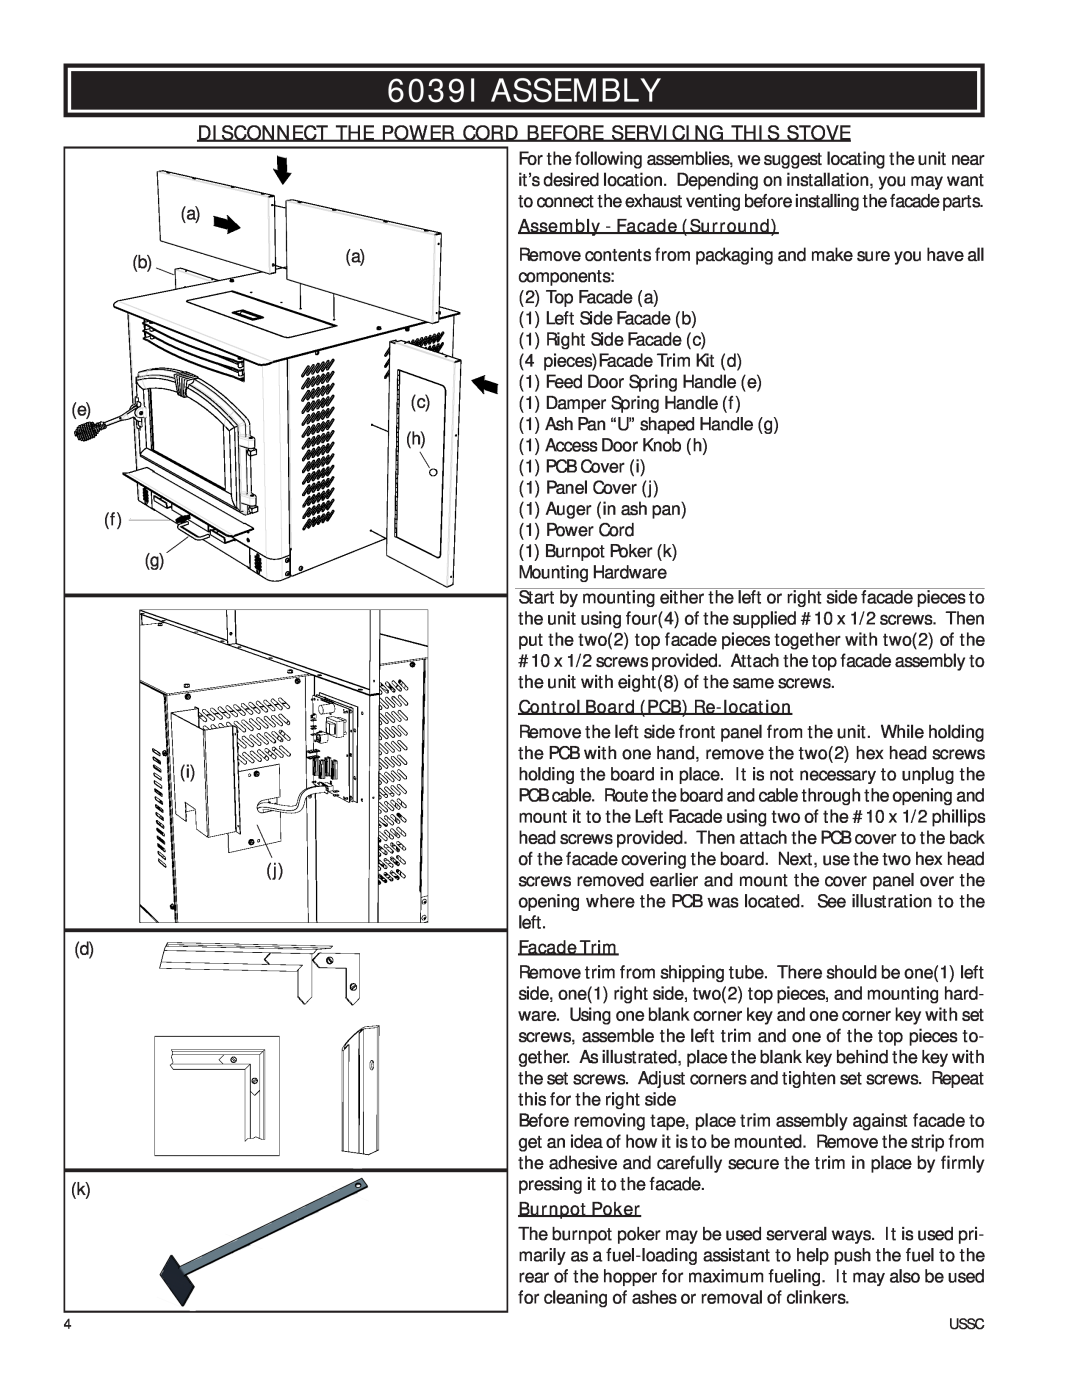 United States Stove owner manual 6039I ASSEMBLY, Assembly - Facade Surround, Control Board PCB Re-location, Facade Trim 